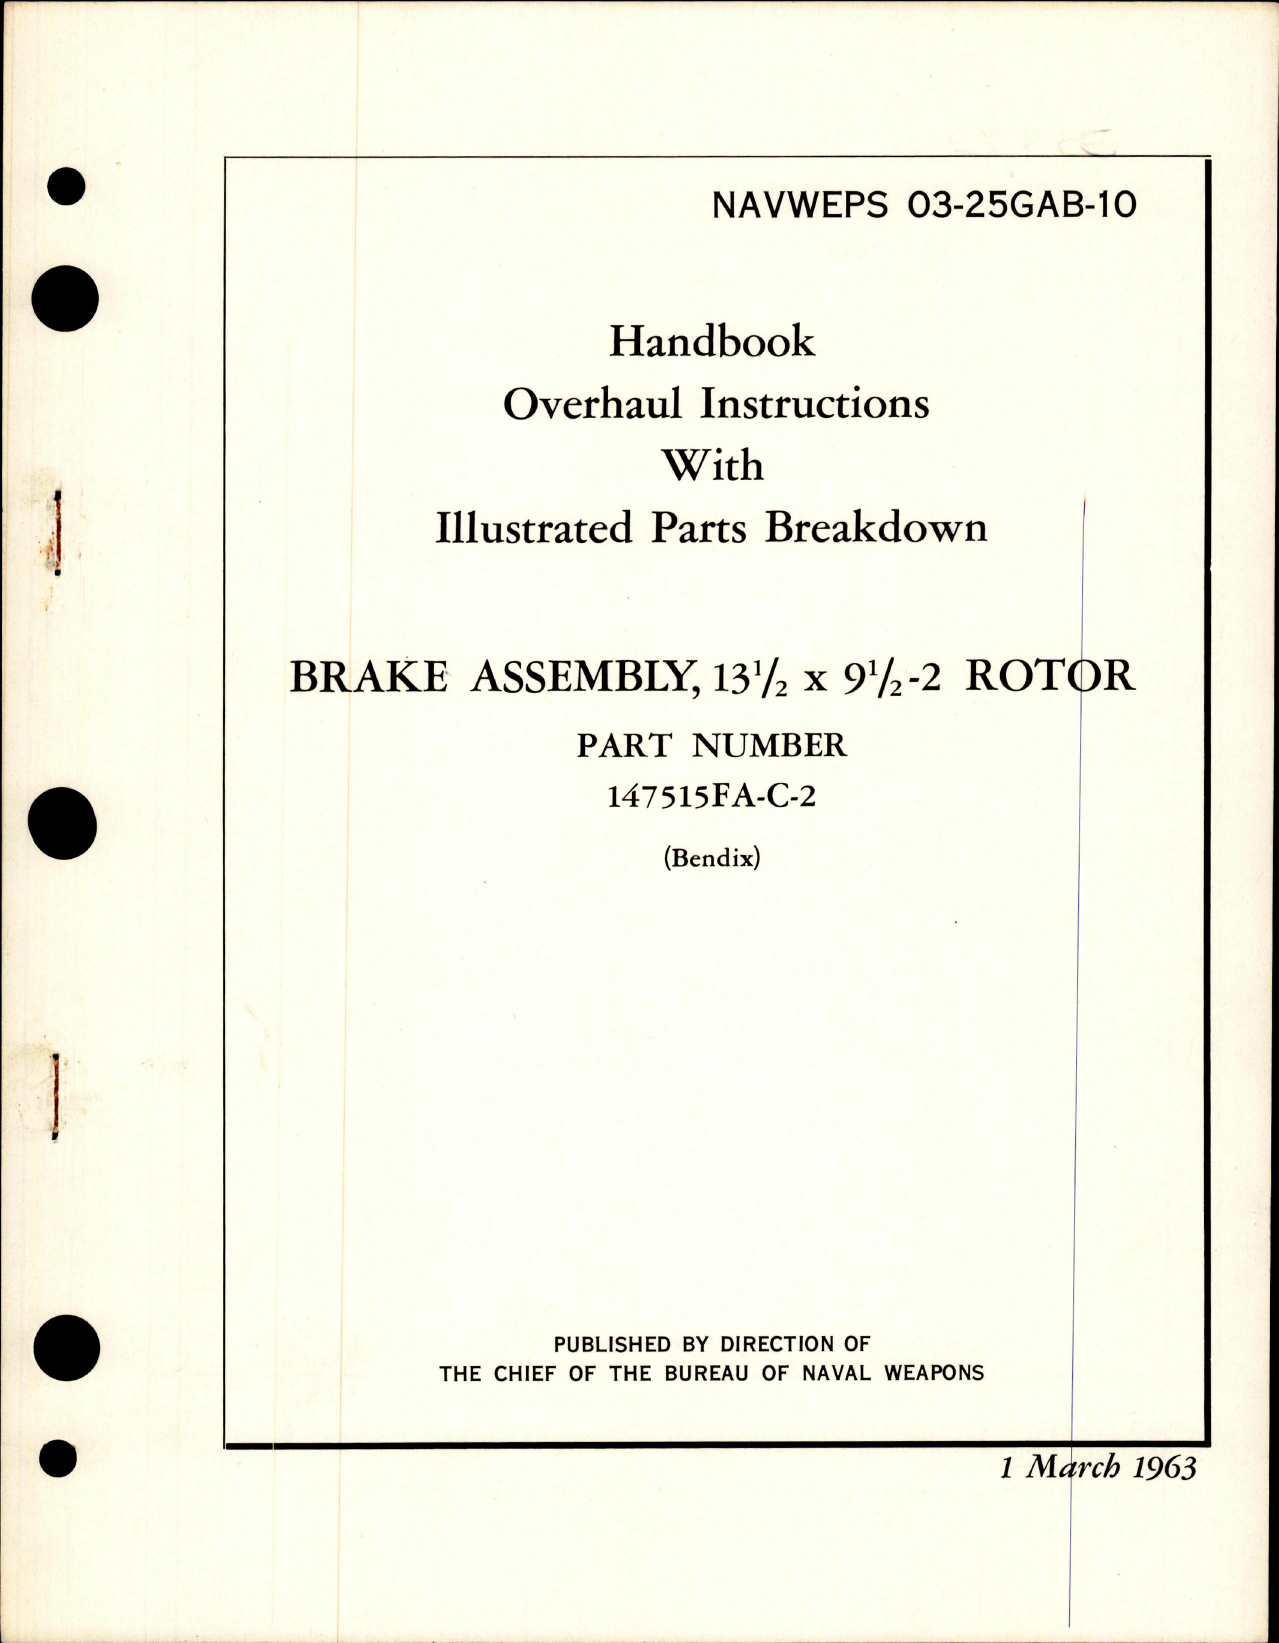 Sample page 1 from AirCorps Library document: Overhaul Instructions with Parts Breakdown for Brake Assembly 13 1/2 x 9 1/2-2 Rotor - Part 47515FA-C-2 